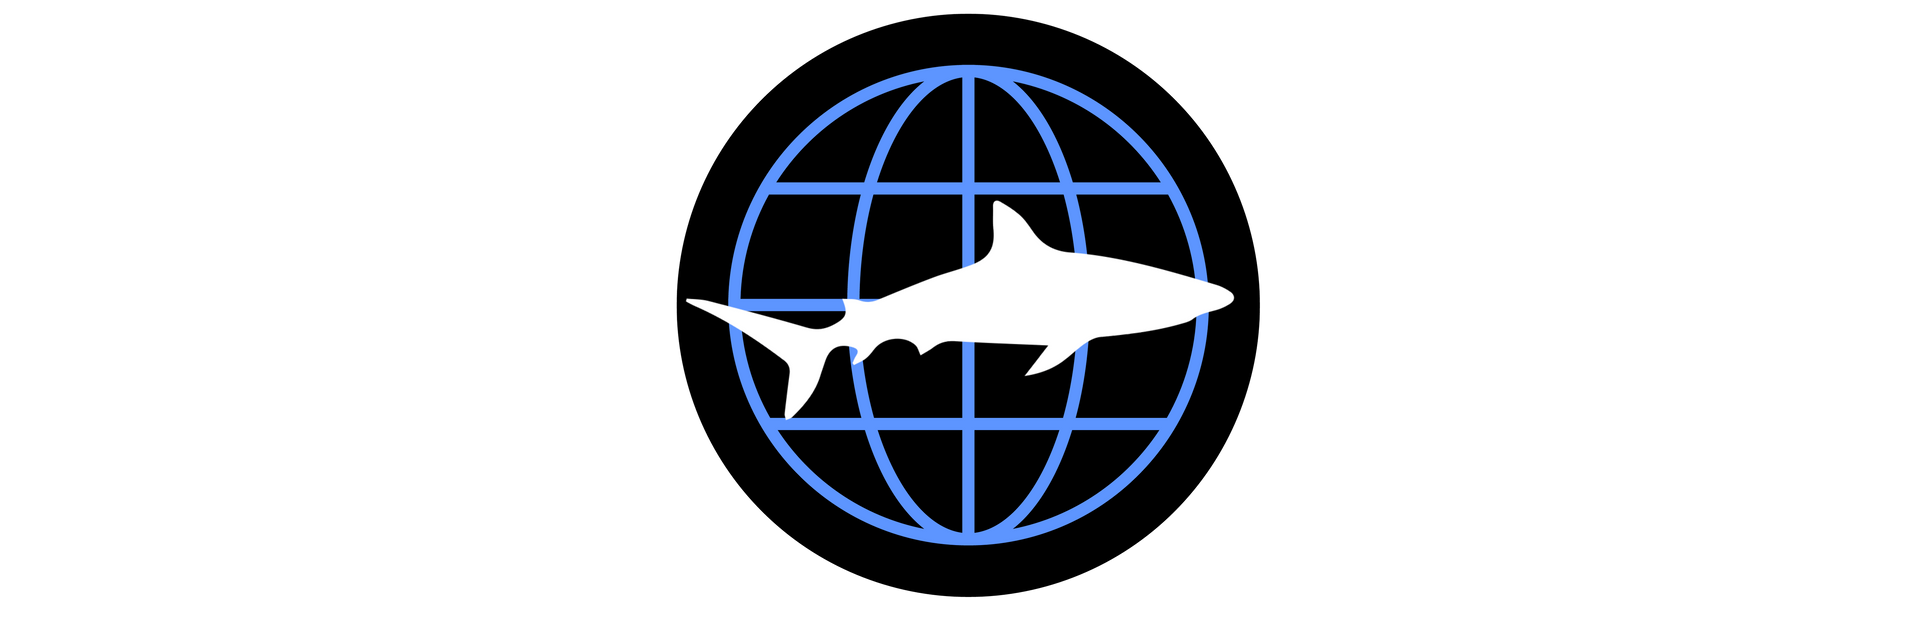 A shark is in the middle of a globe.